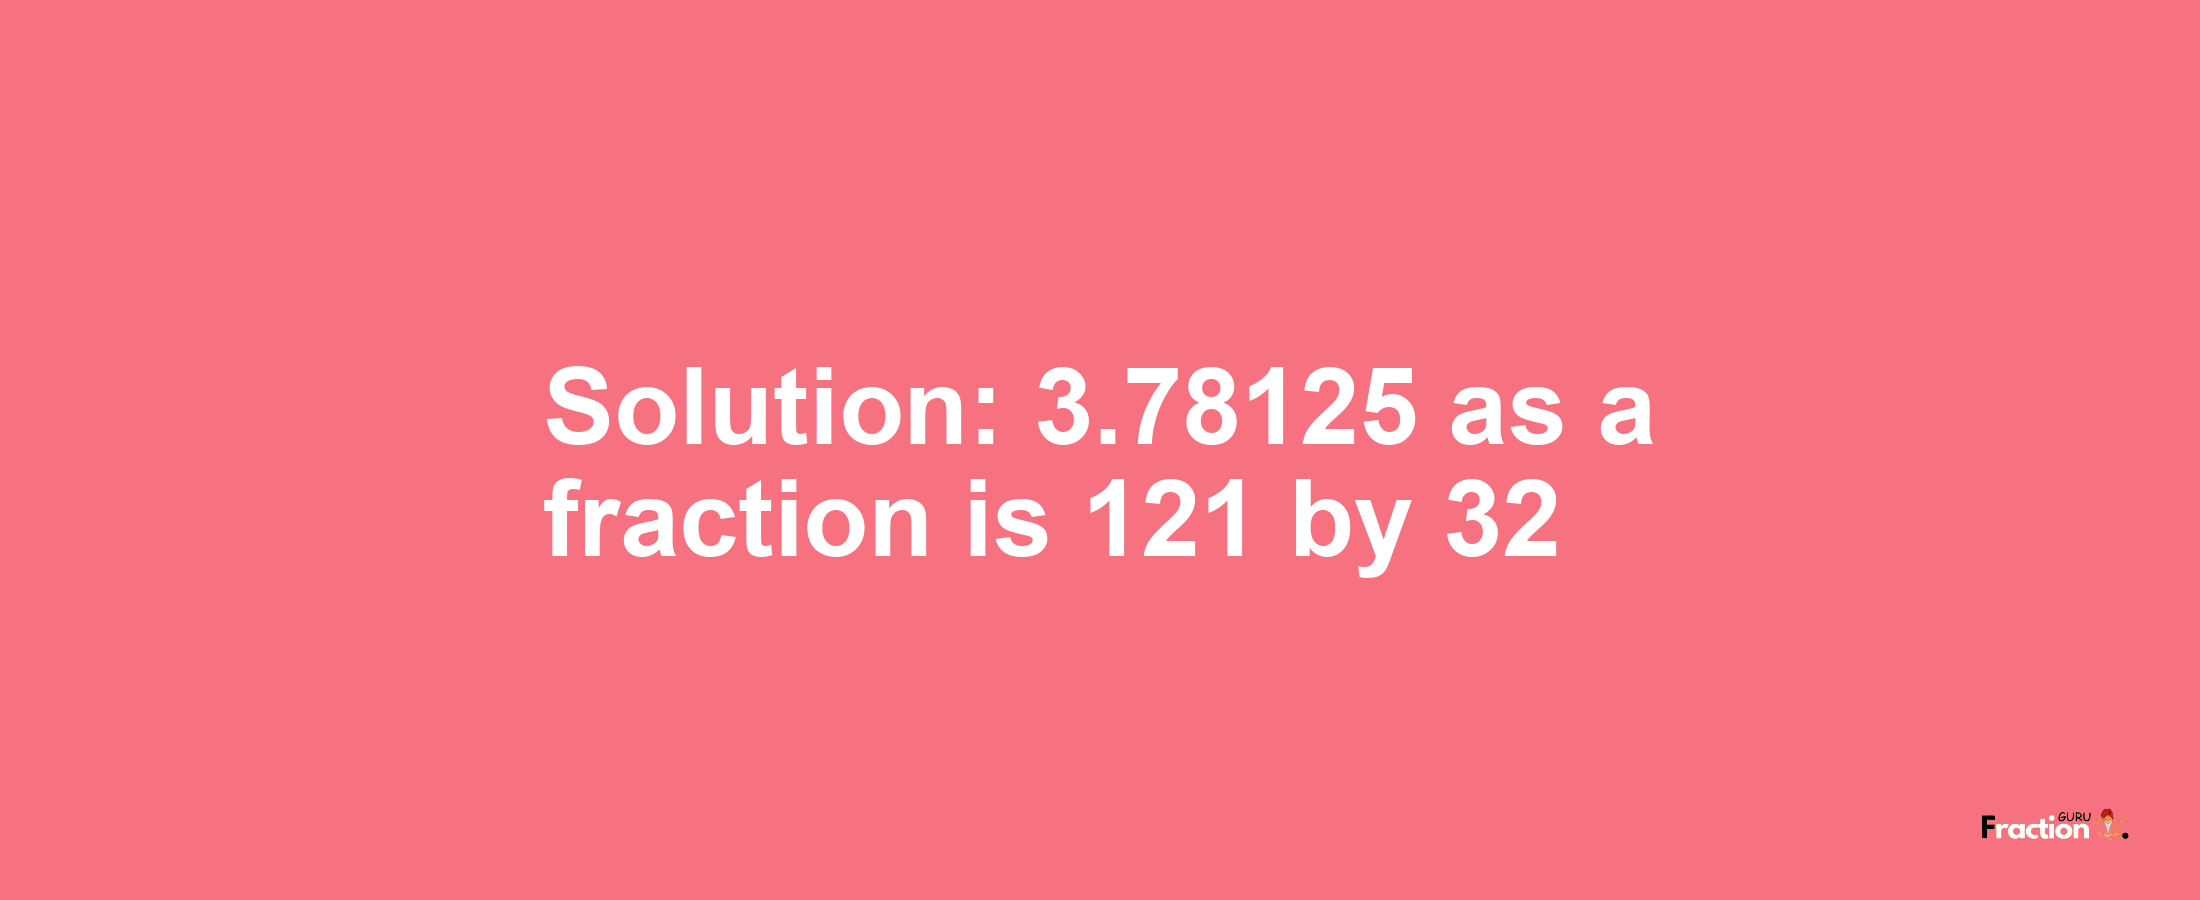 Solution:3.78125 as a fraction is 121/32